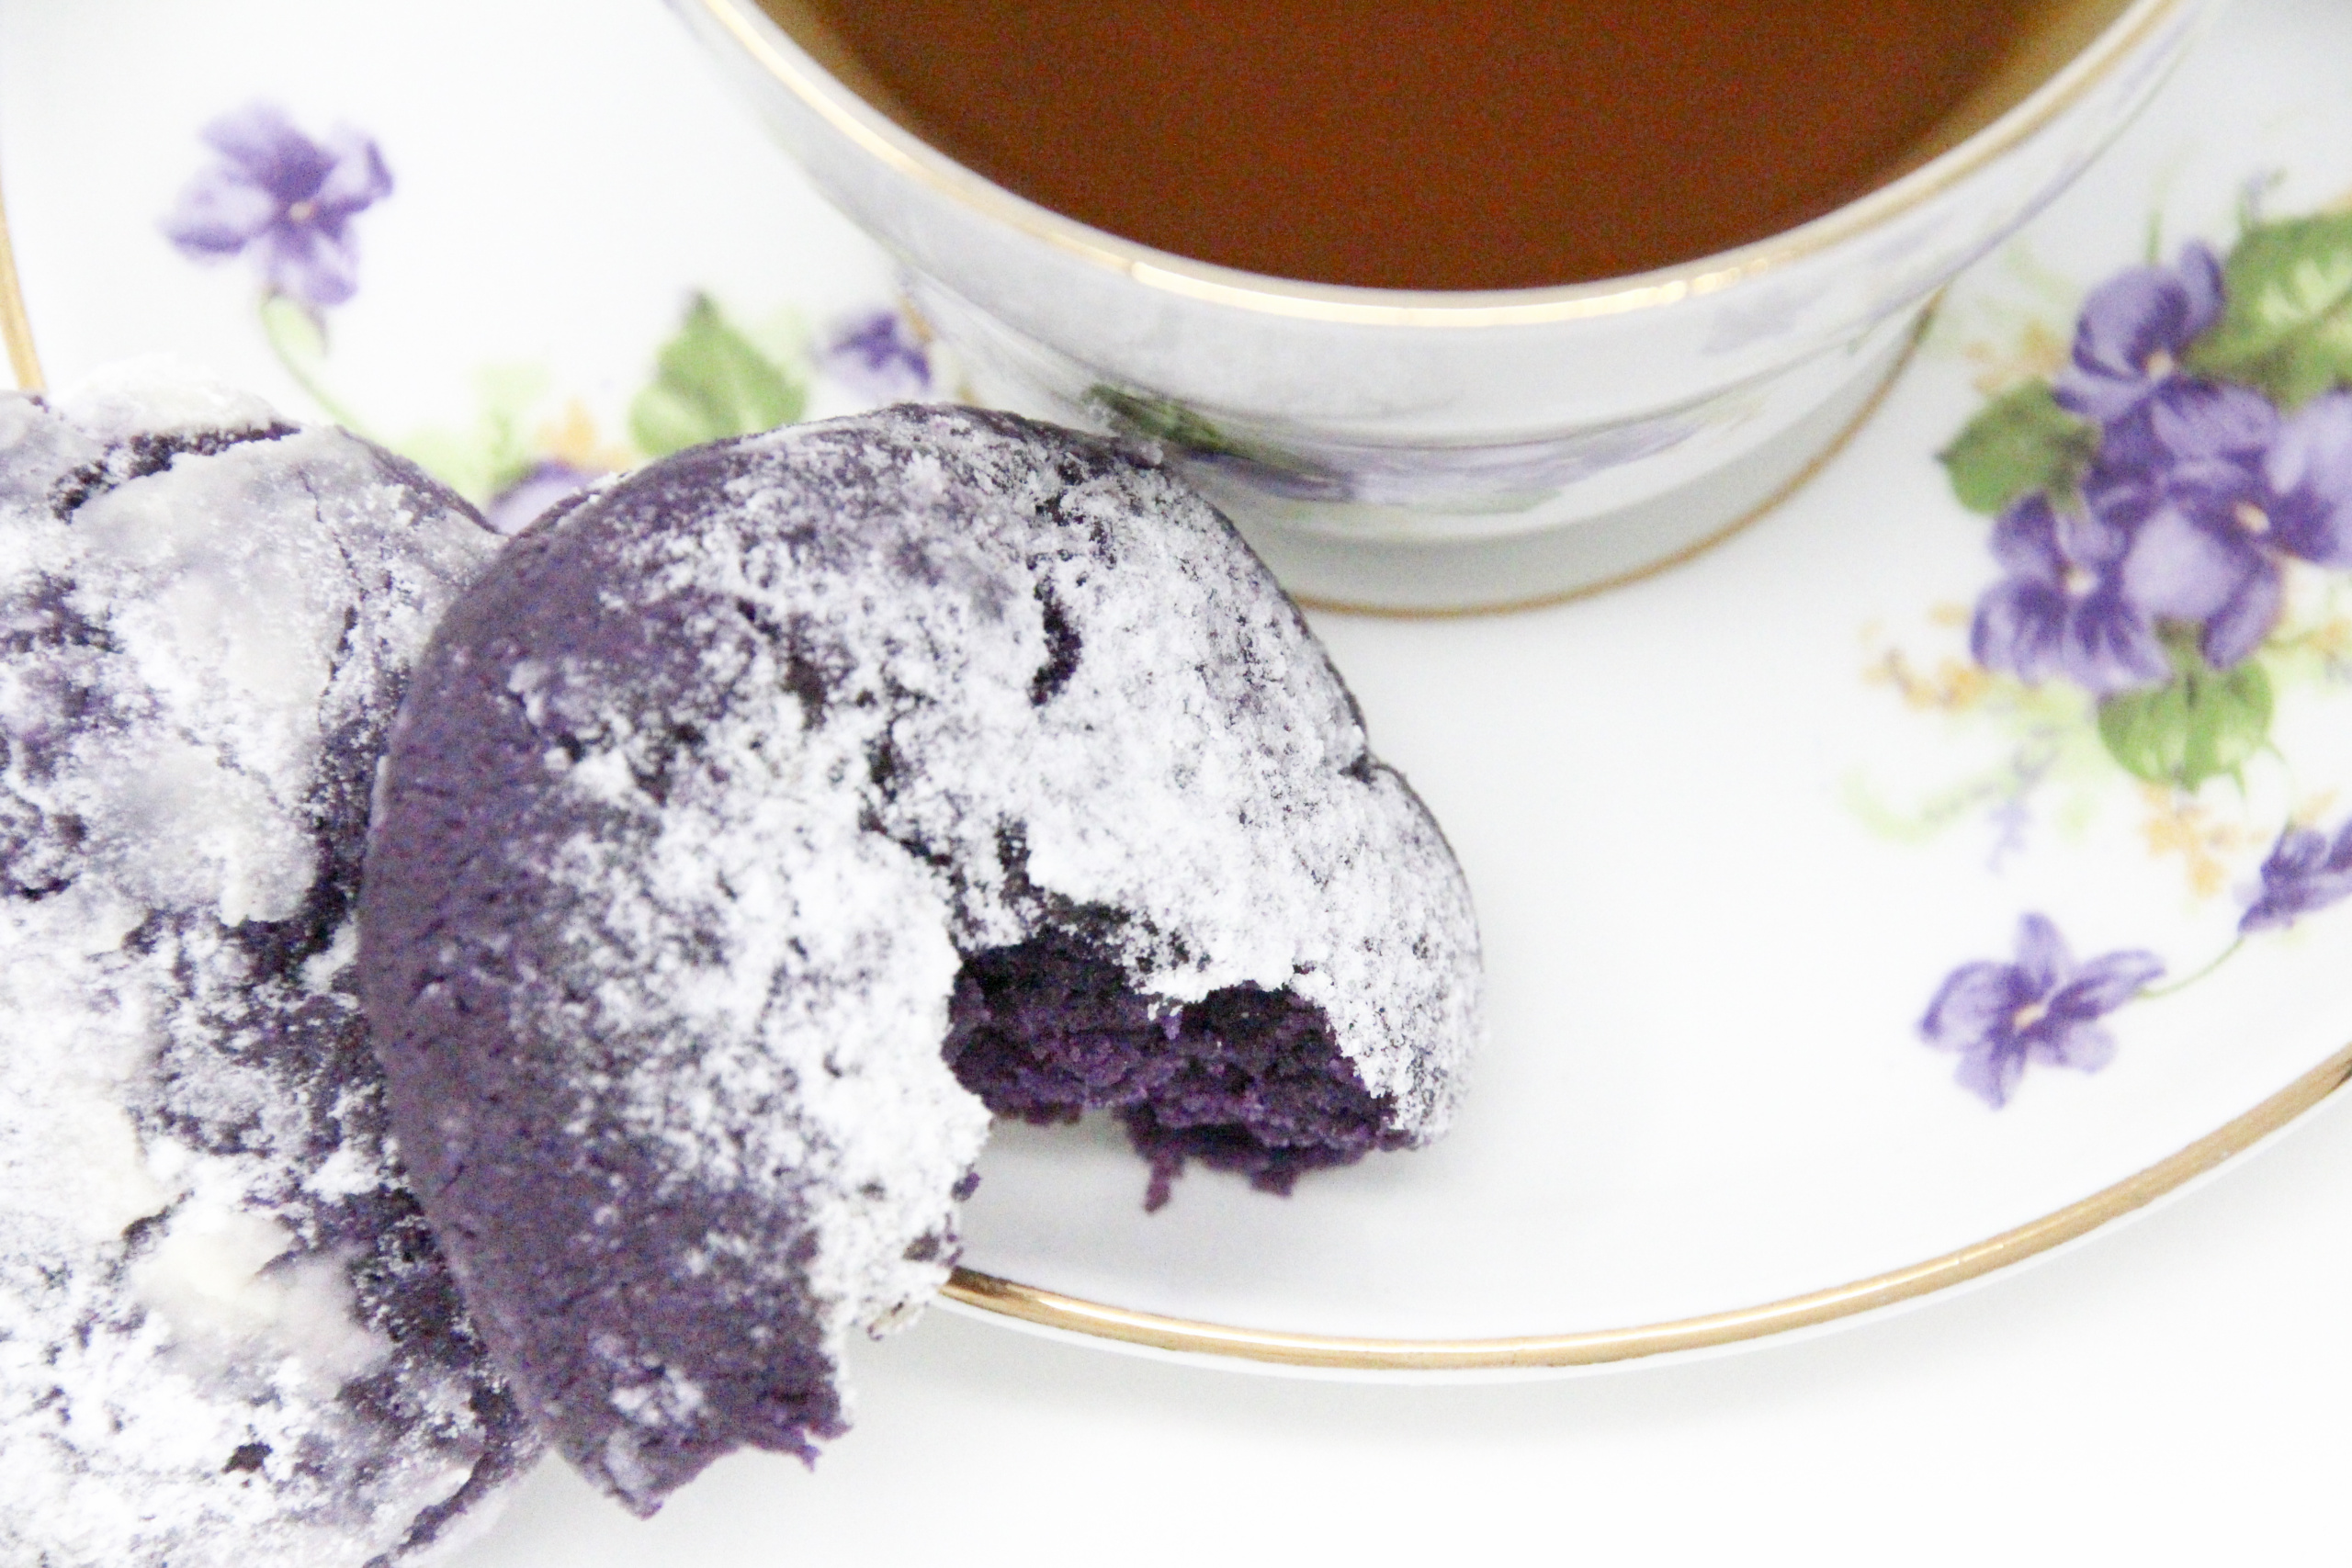 Traditional Filipino Ube Crinkles are delicious as they are unique and provide a welcome splash of color on any springtime cookie platter! Recipe shared with permission granted by Berkley Publishing, from cozy mystery ARSENIC AND ADOBO by Mia P. Manansala.